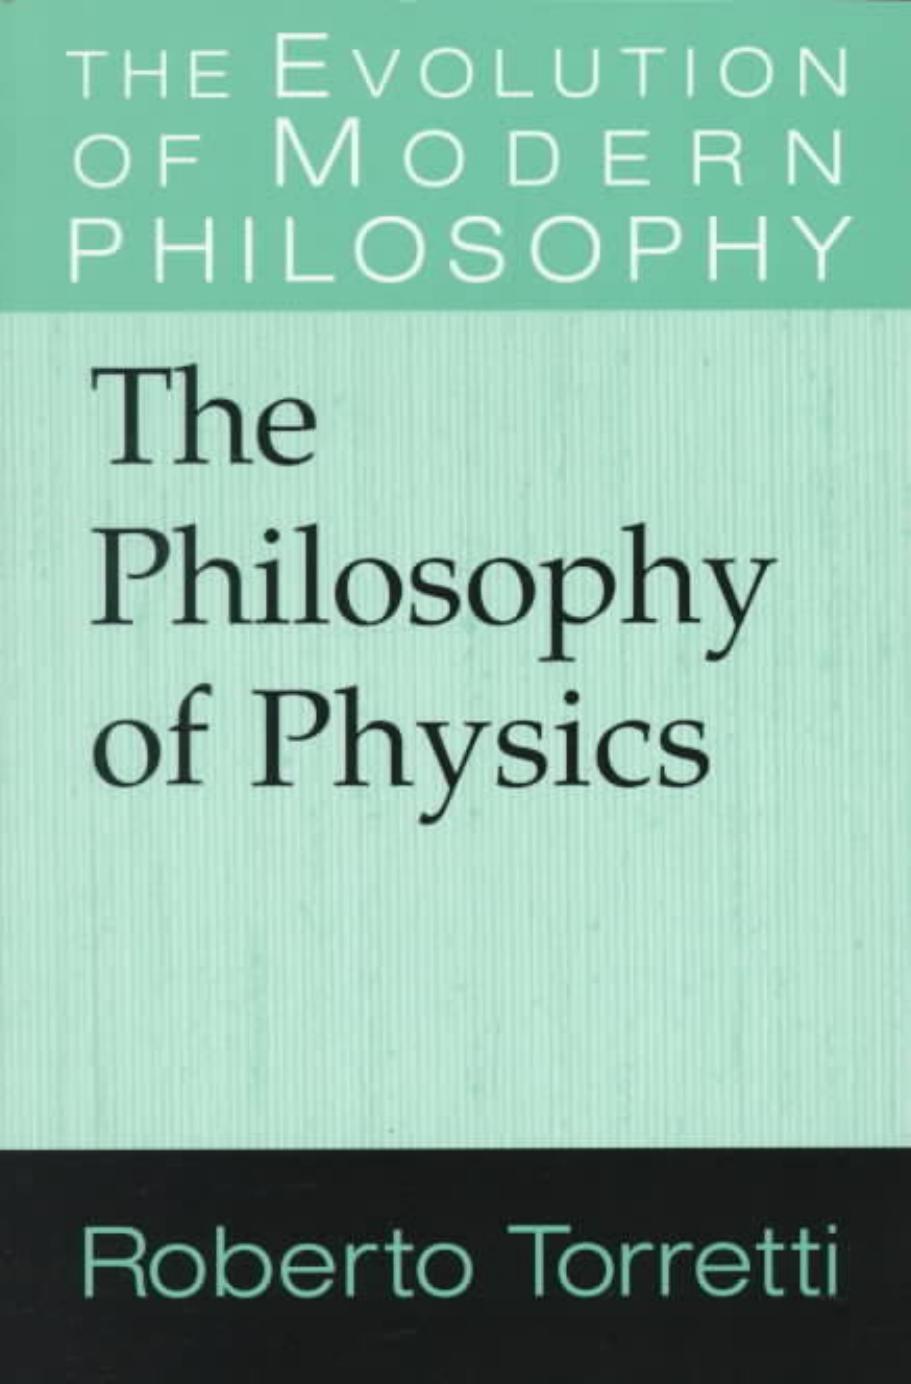 The Philosophy of Physics